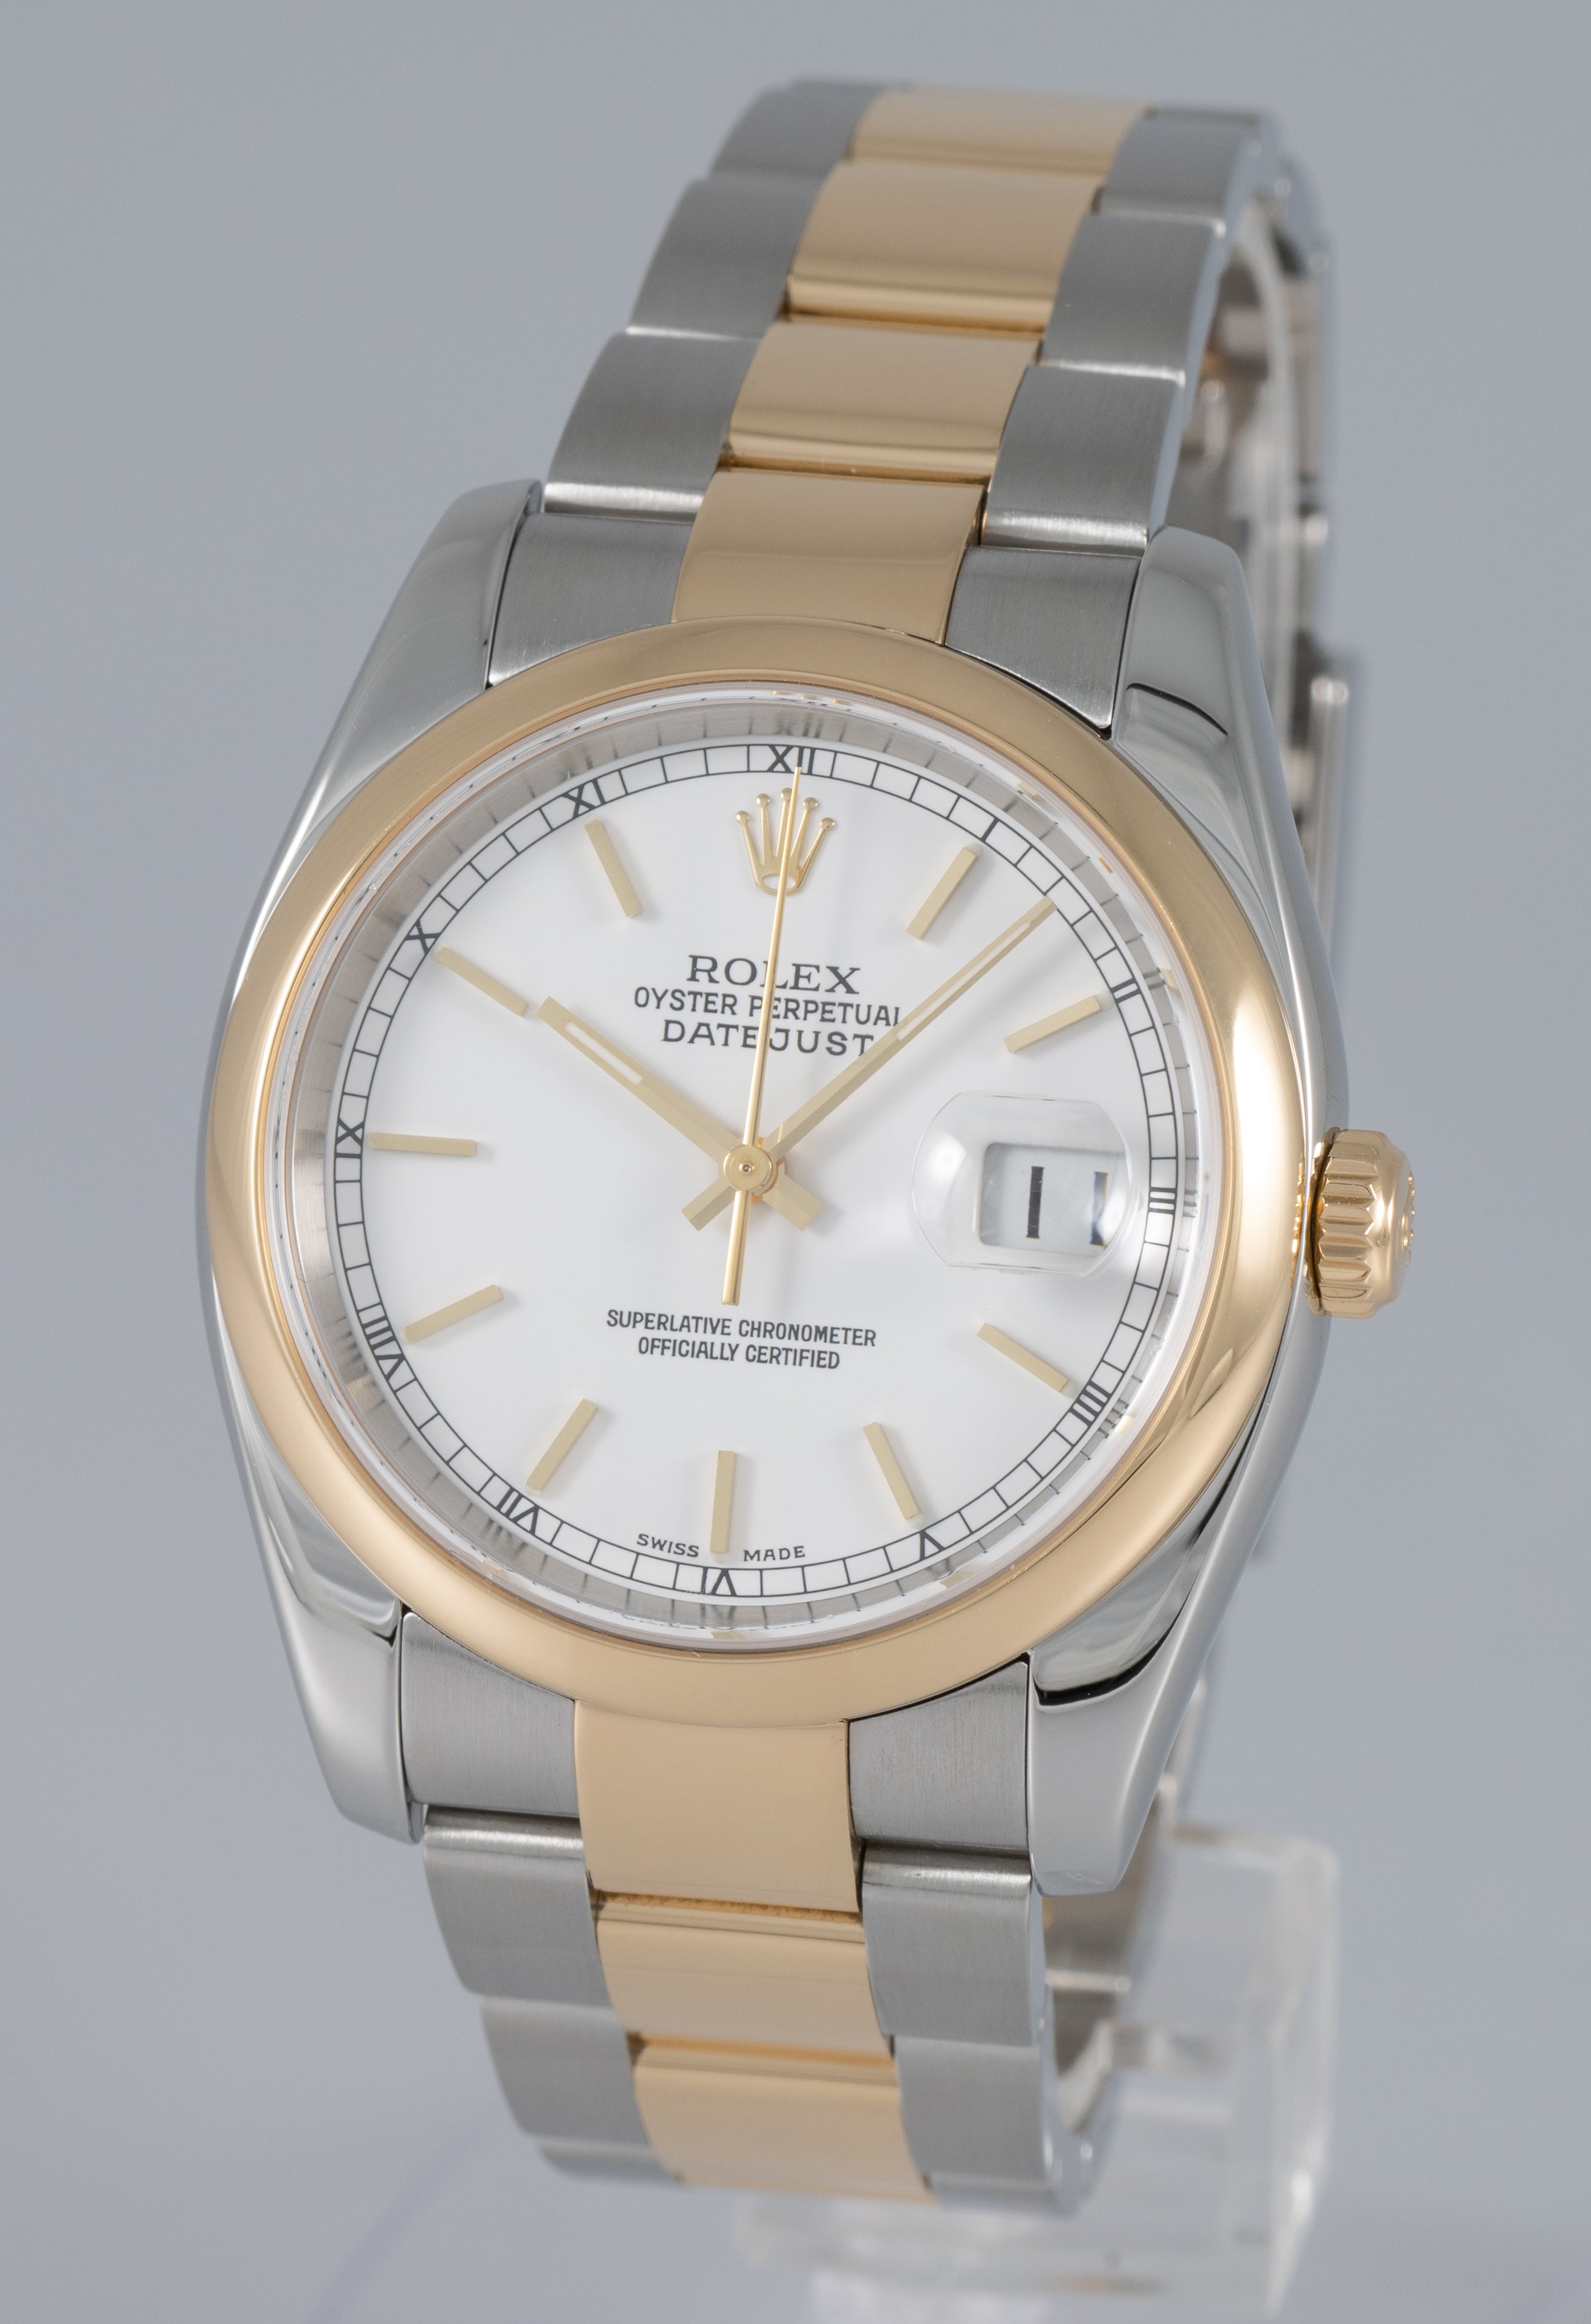 Rolex Datejust 36 Steel and Yellow Gold Ref: 116203 